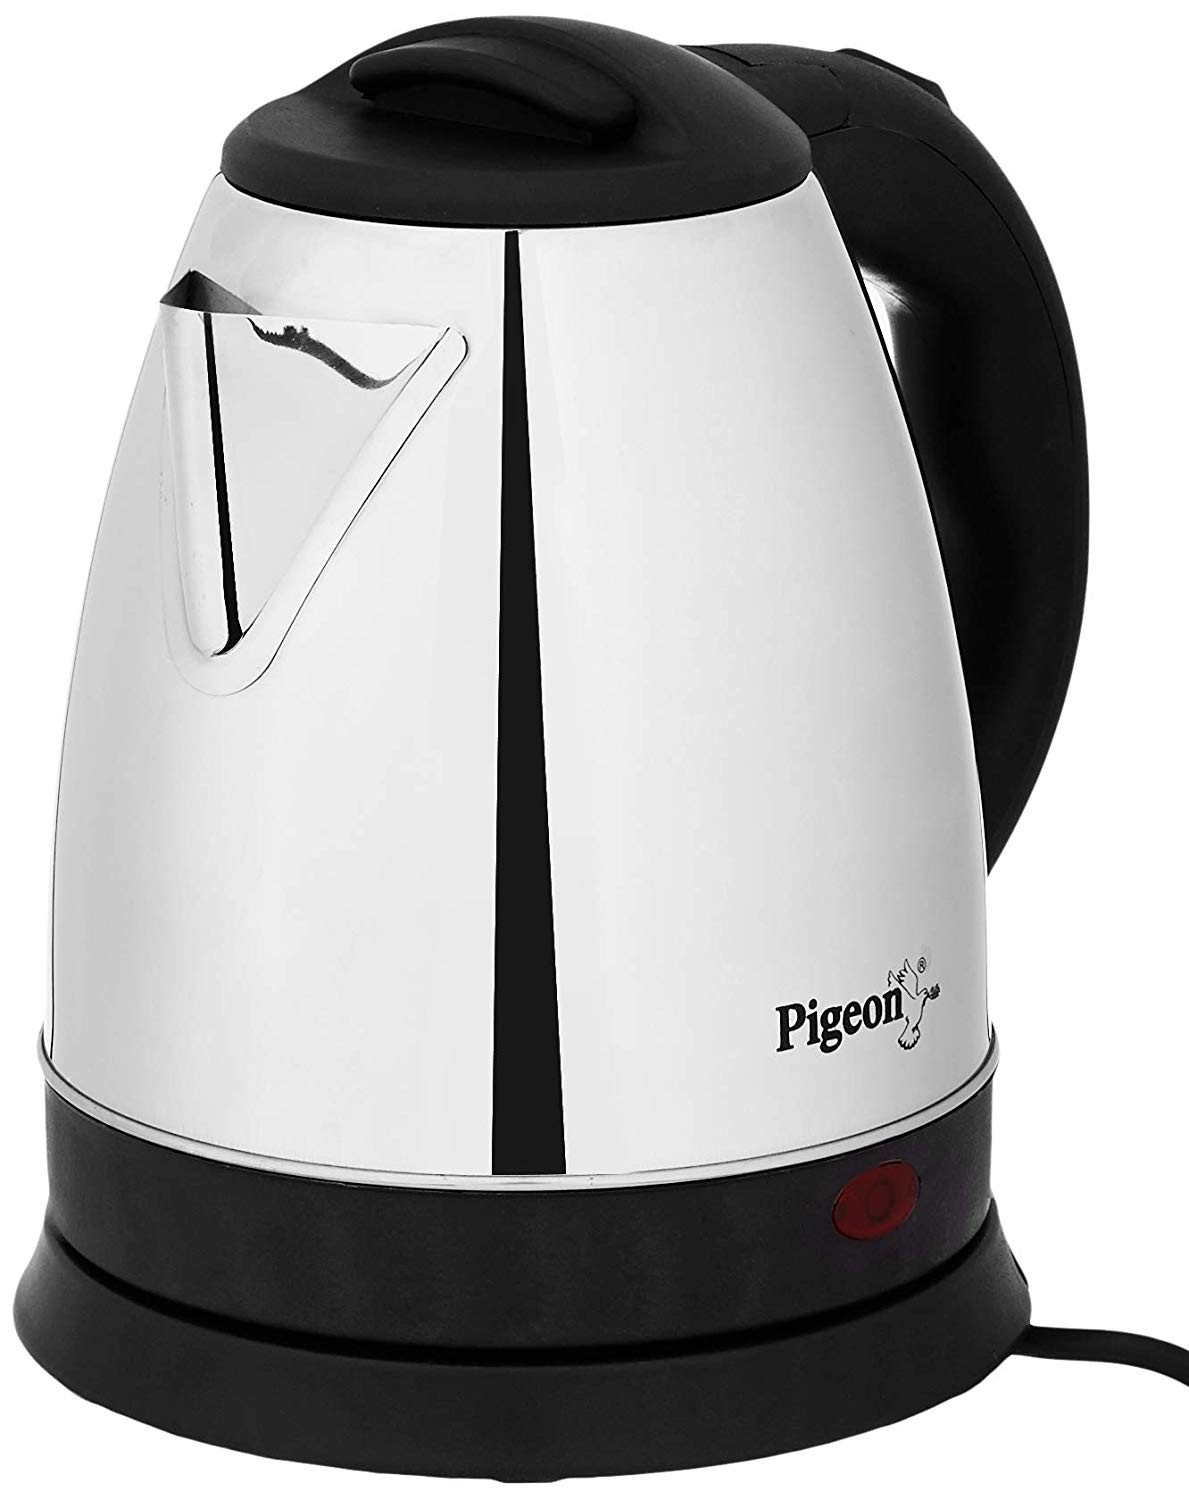 (Hot Deal) Pigeon Amaze 1.5 Liter Electric Kettles In Just Rs.449[Worth Rs.1195]